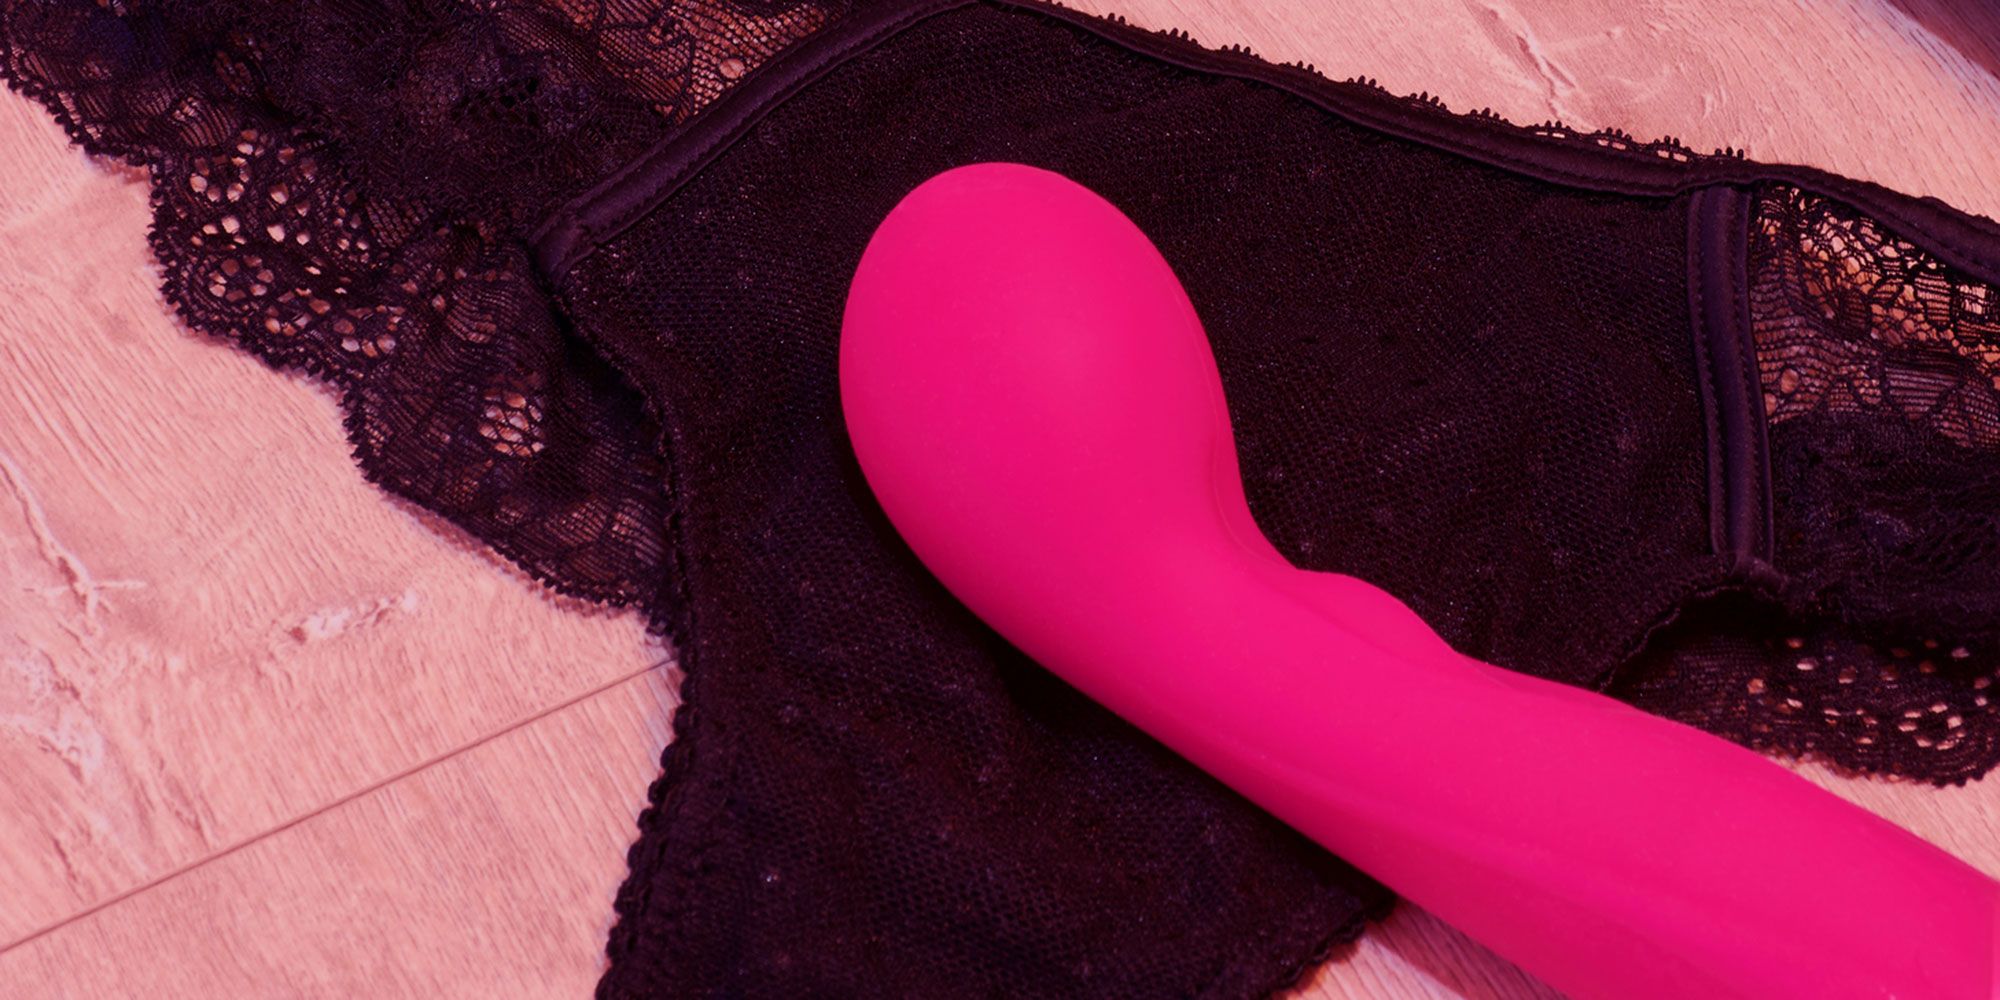 8 sex toy stories thatll make you physically cringe pic